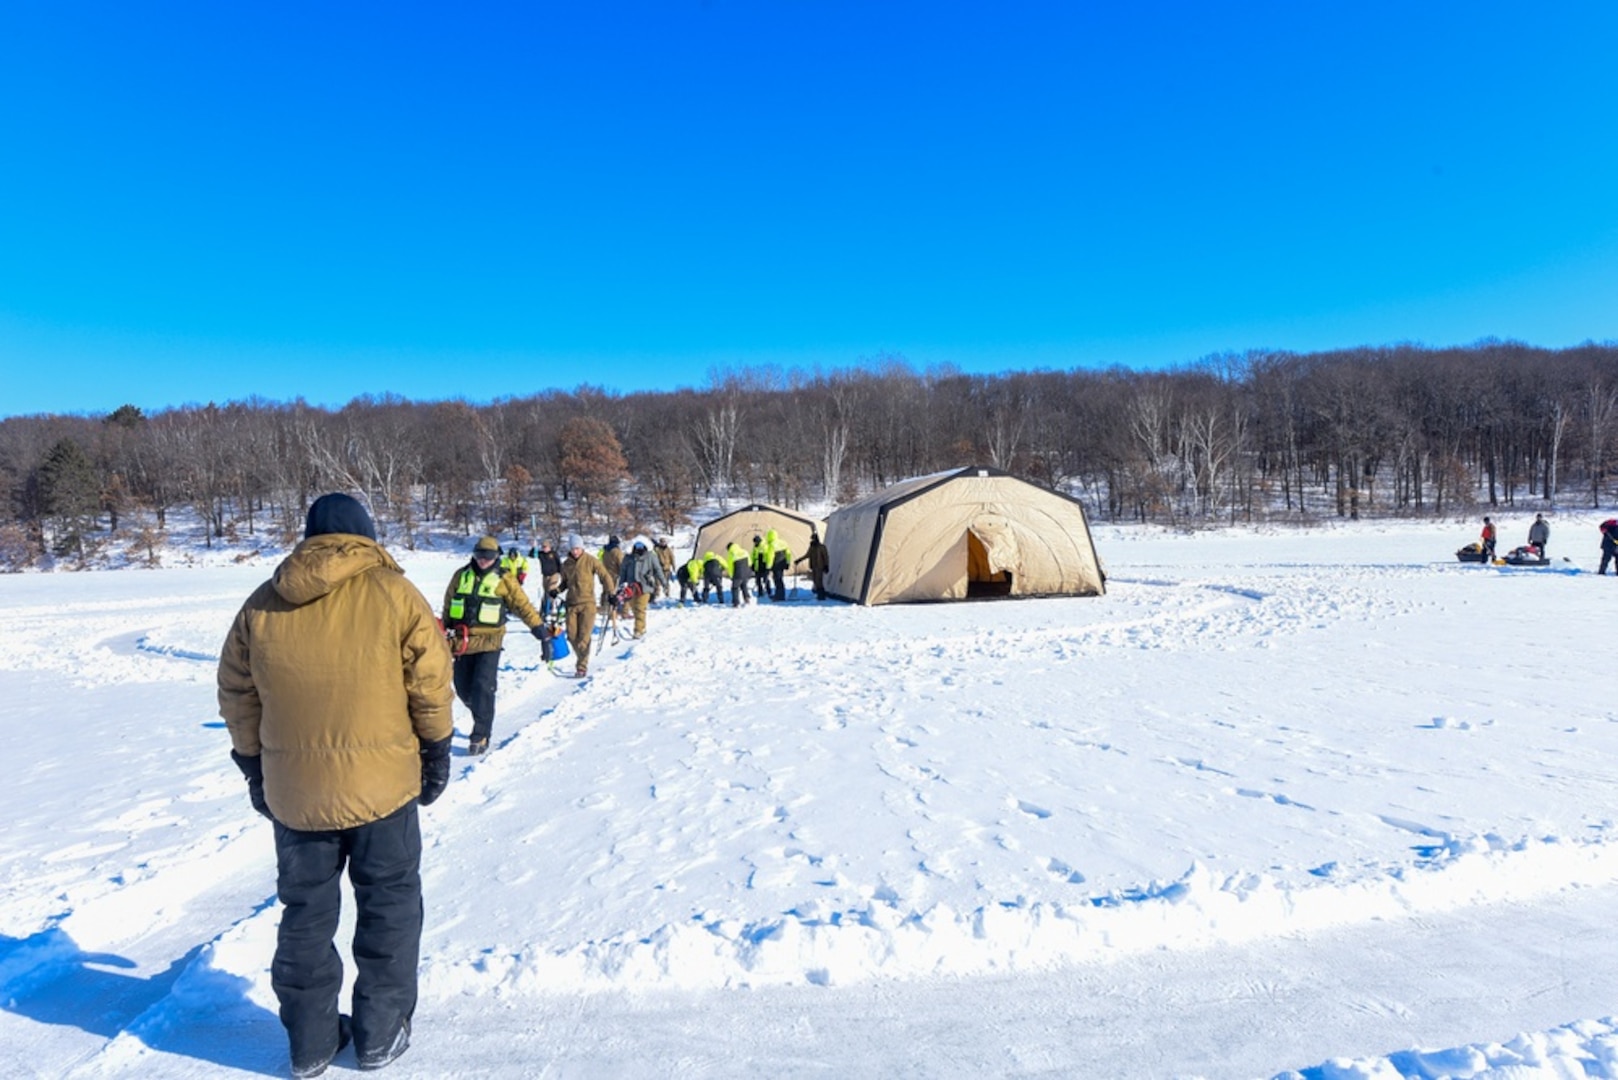 Students from the joint-service Cold Water Ice Diving course finish staging the dive site to move to the next phase of instruction on Lake Ferrell, Minn., Feb. 2, 2022. Divers from the U.S. Coast Guard, U.S. Army and U.S. Navy participated in a Cold Water Ice Diving Course located on Minnesota National Guard Base Camp Ripley to gain the skills needed to dive in cold-water and ice environments. (U.S. Coast Guard Photo by Petty Officer 3rd Class Gregory Schell)